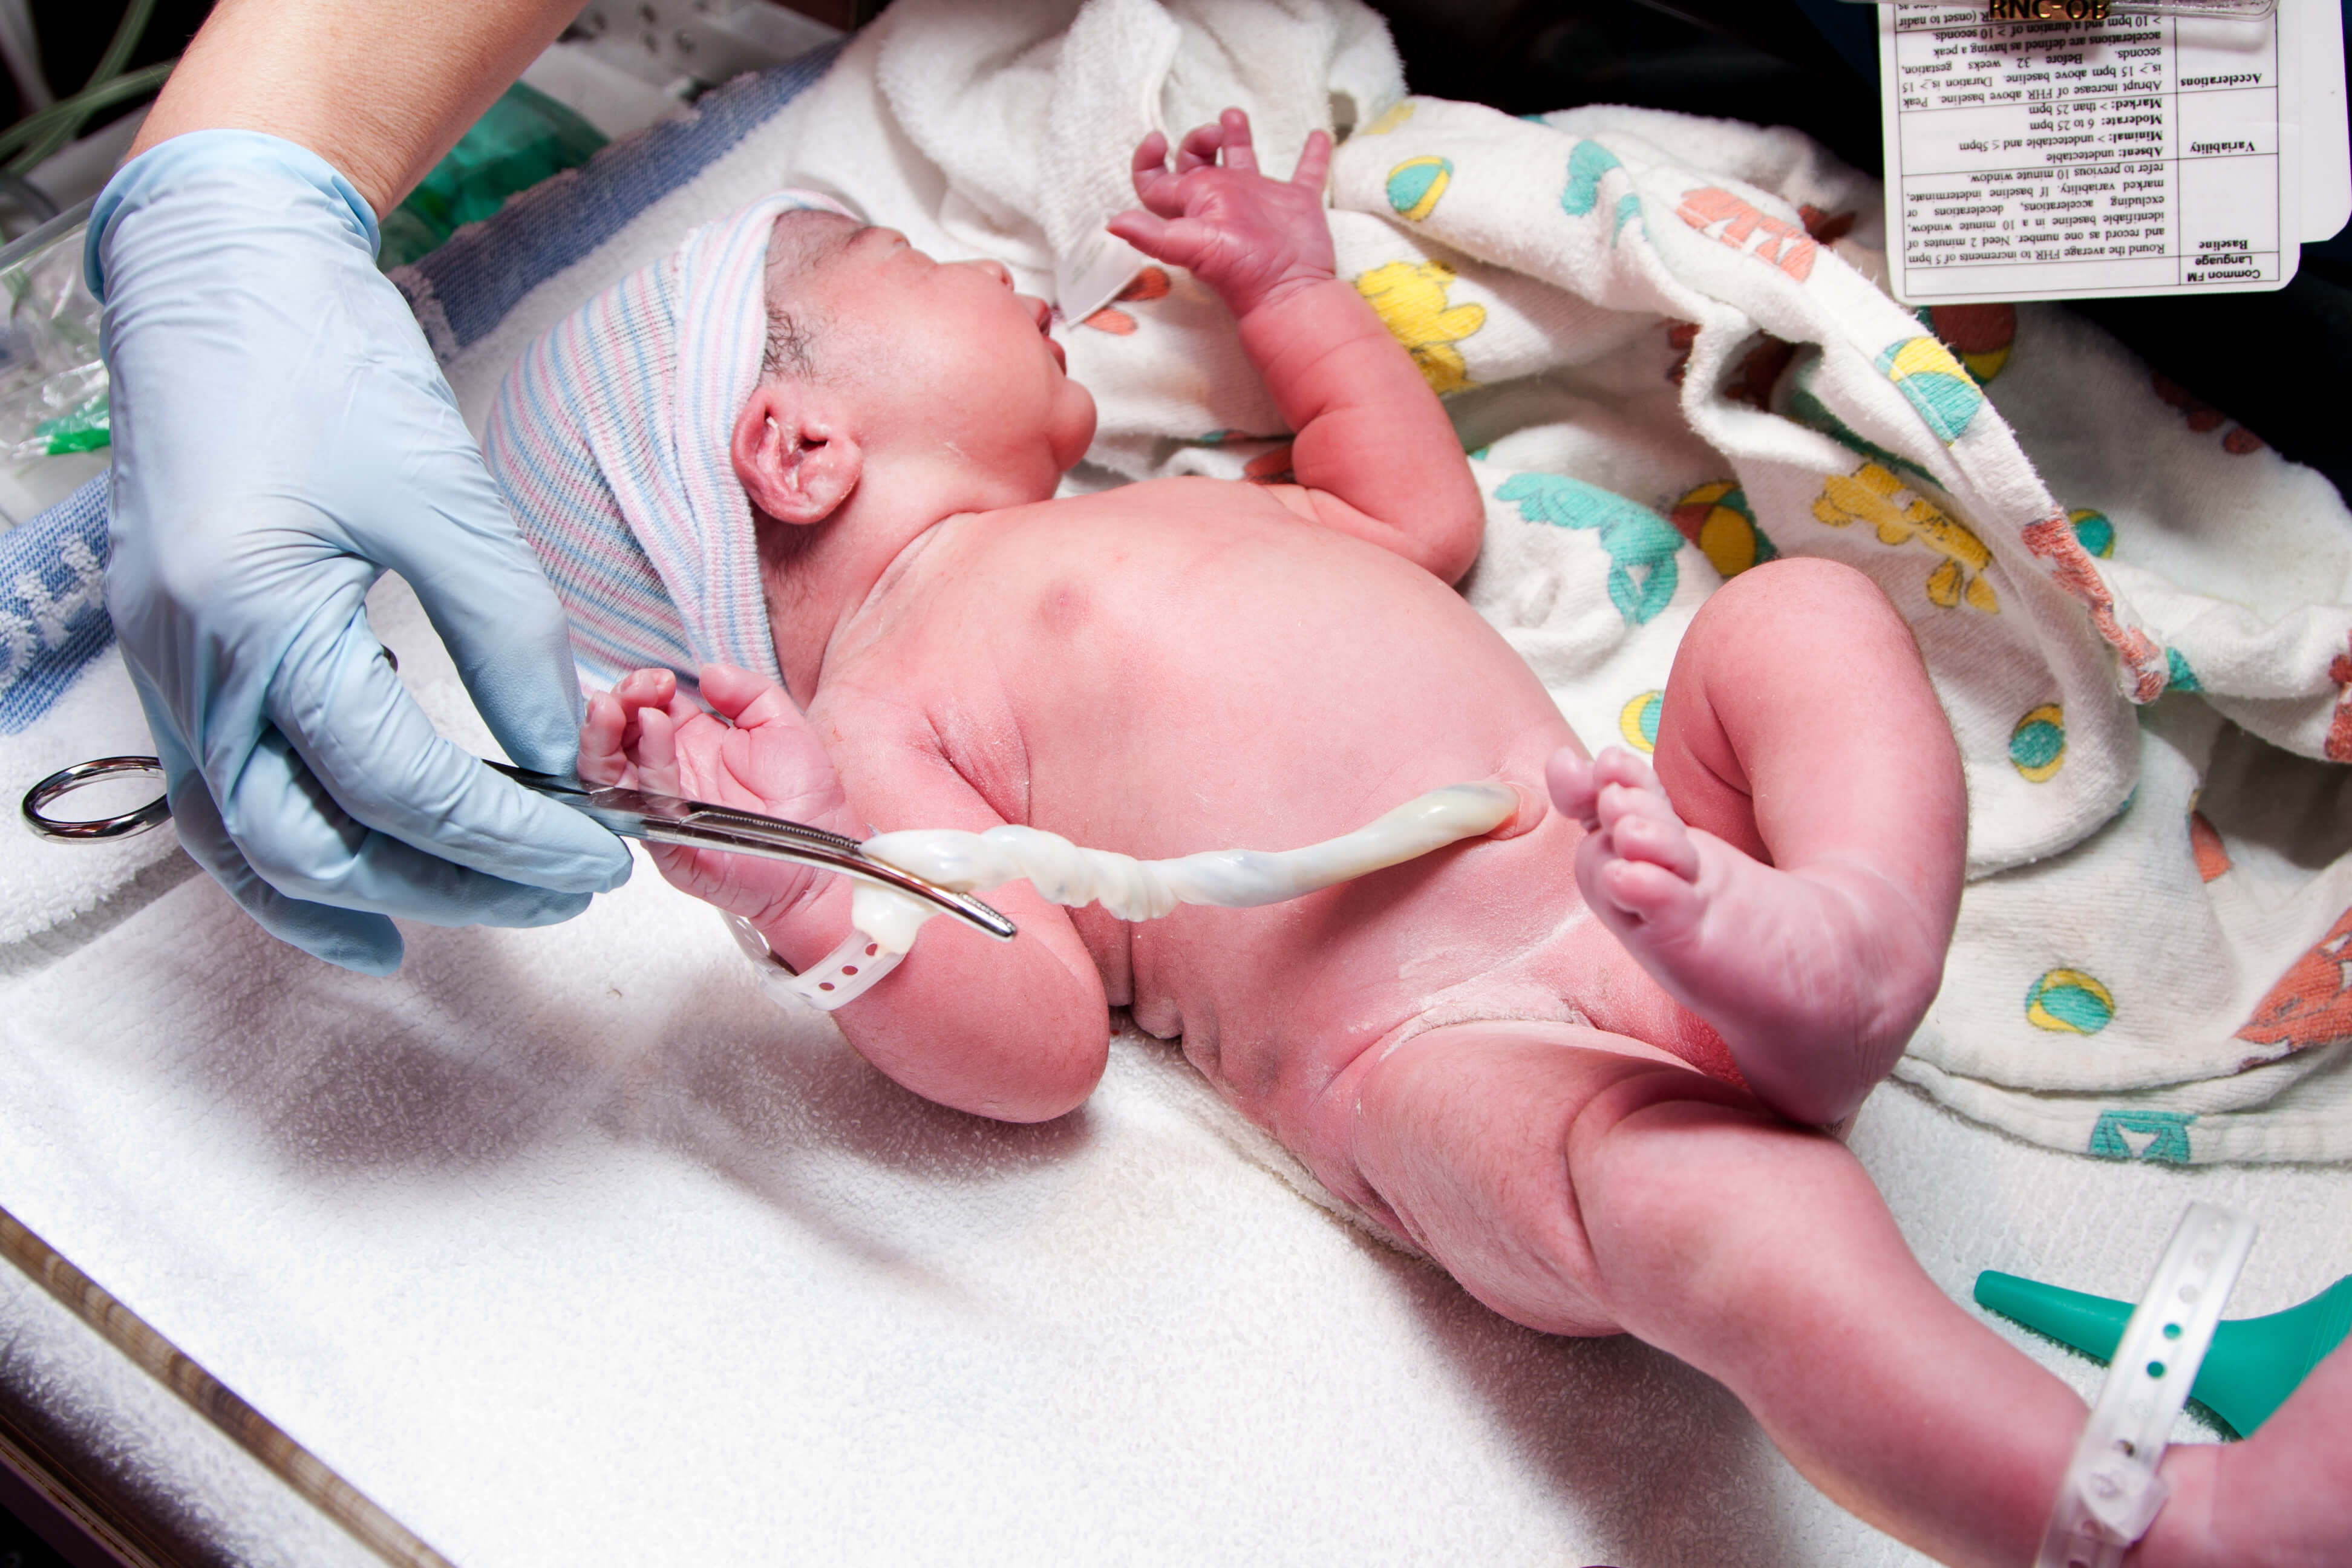 Umbilical Cord Complications - Birth Injuries & ProblemsCerebral Palsy